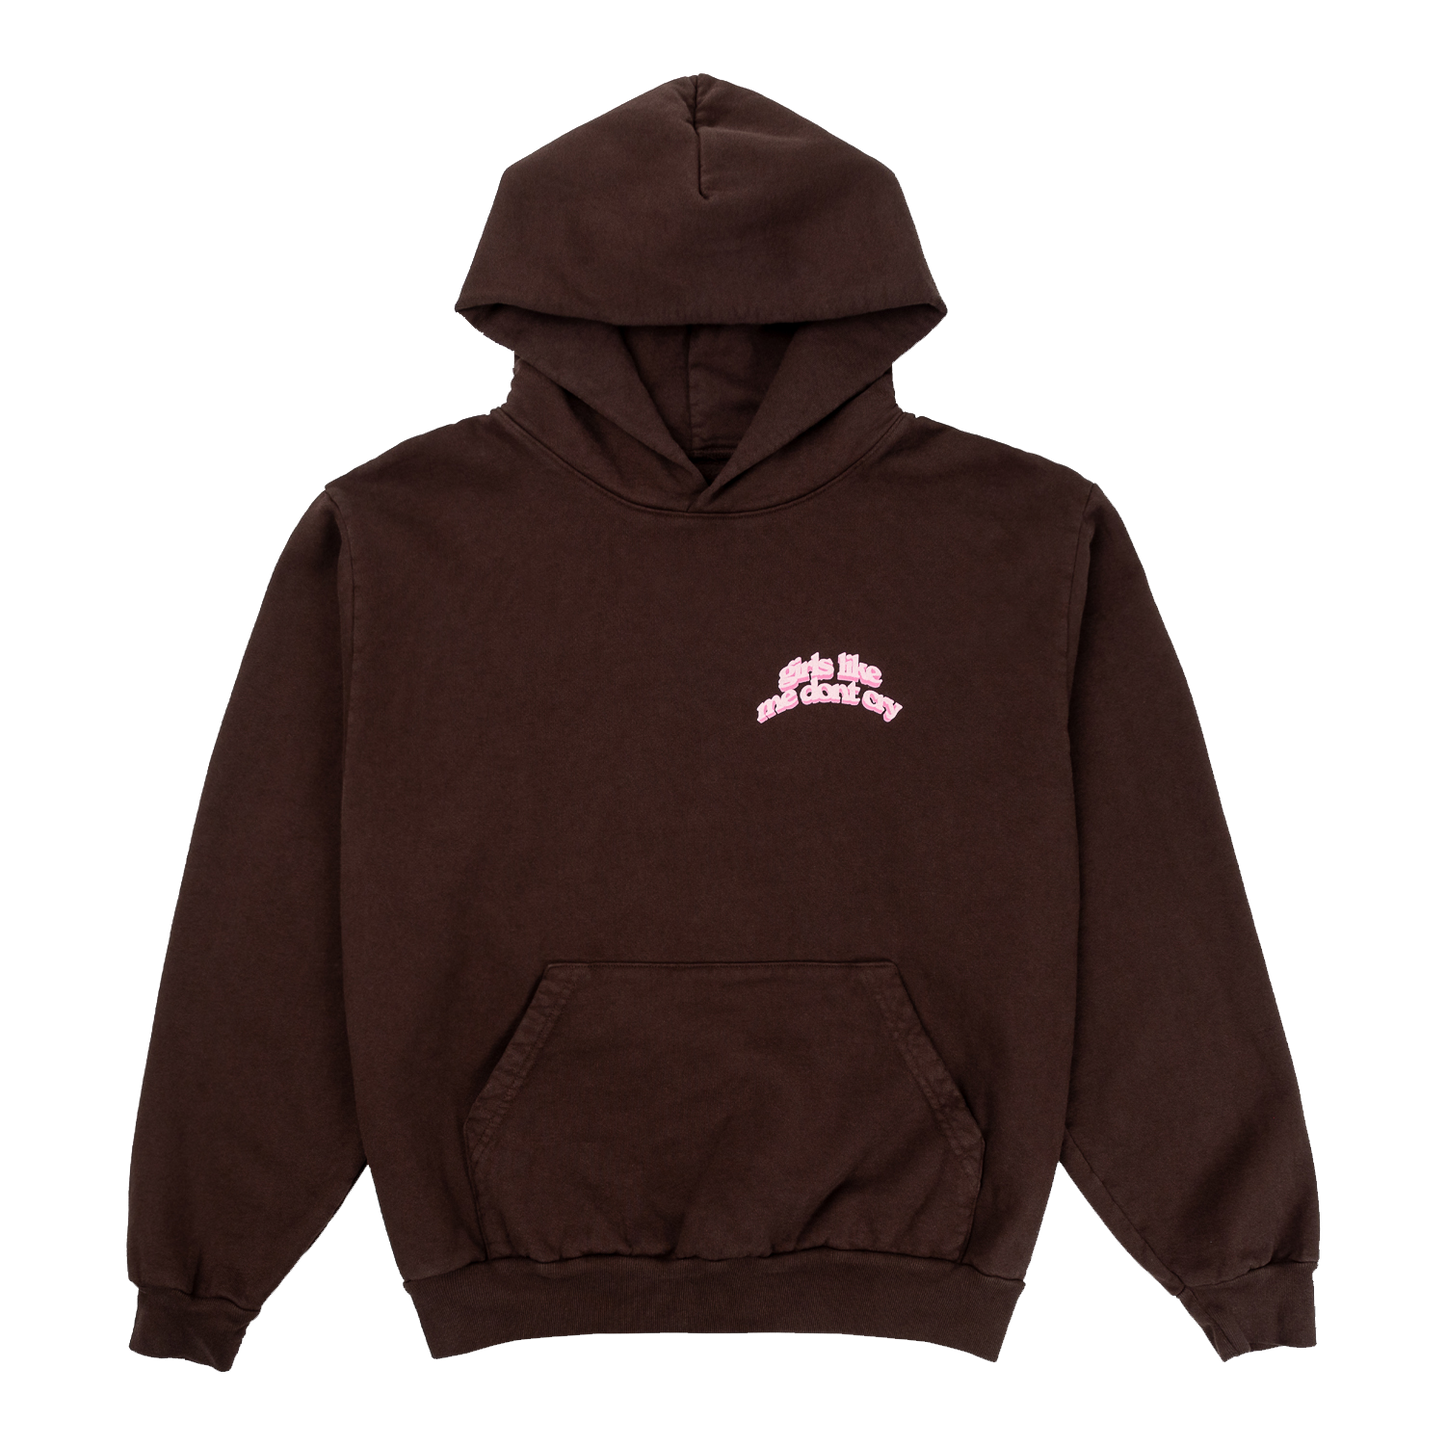 girls like me don't cry west coast tour hoodie (brown)